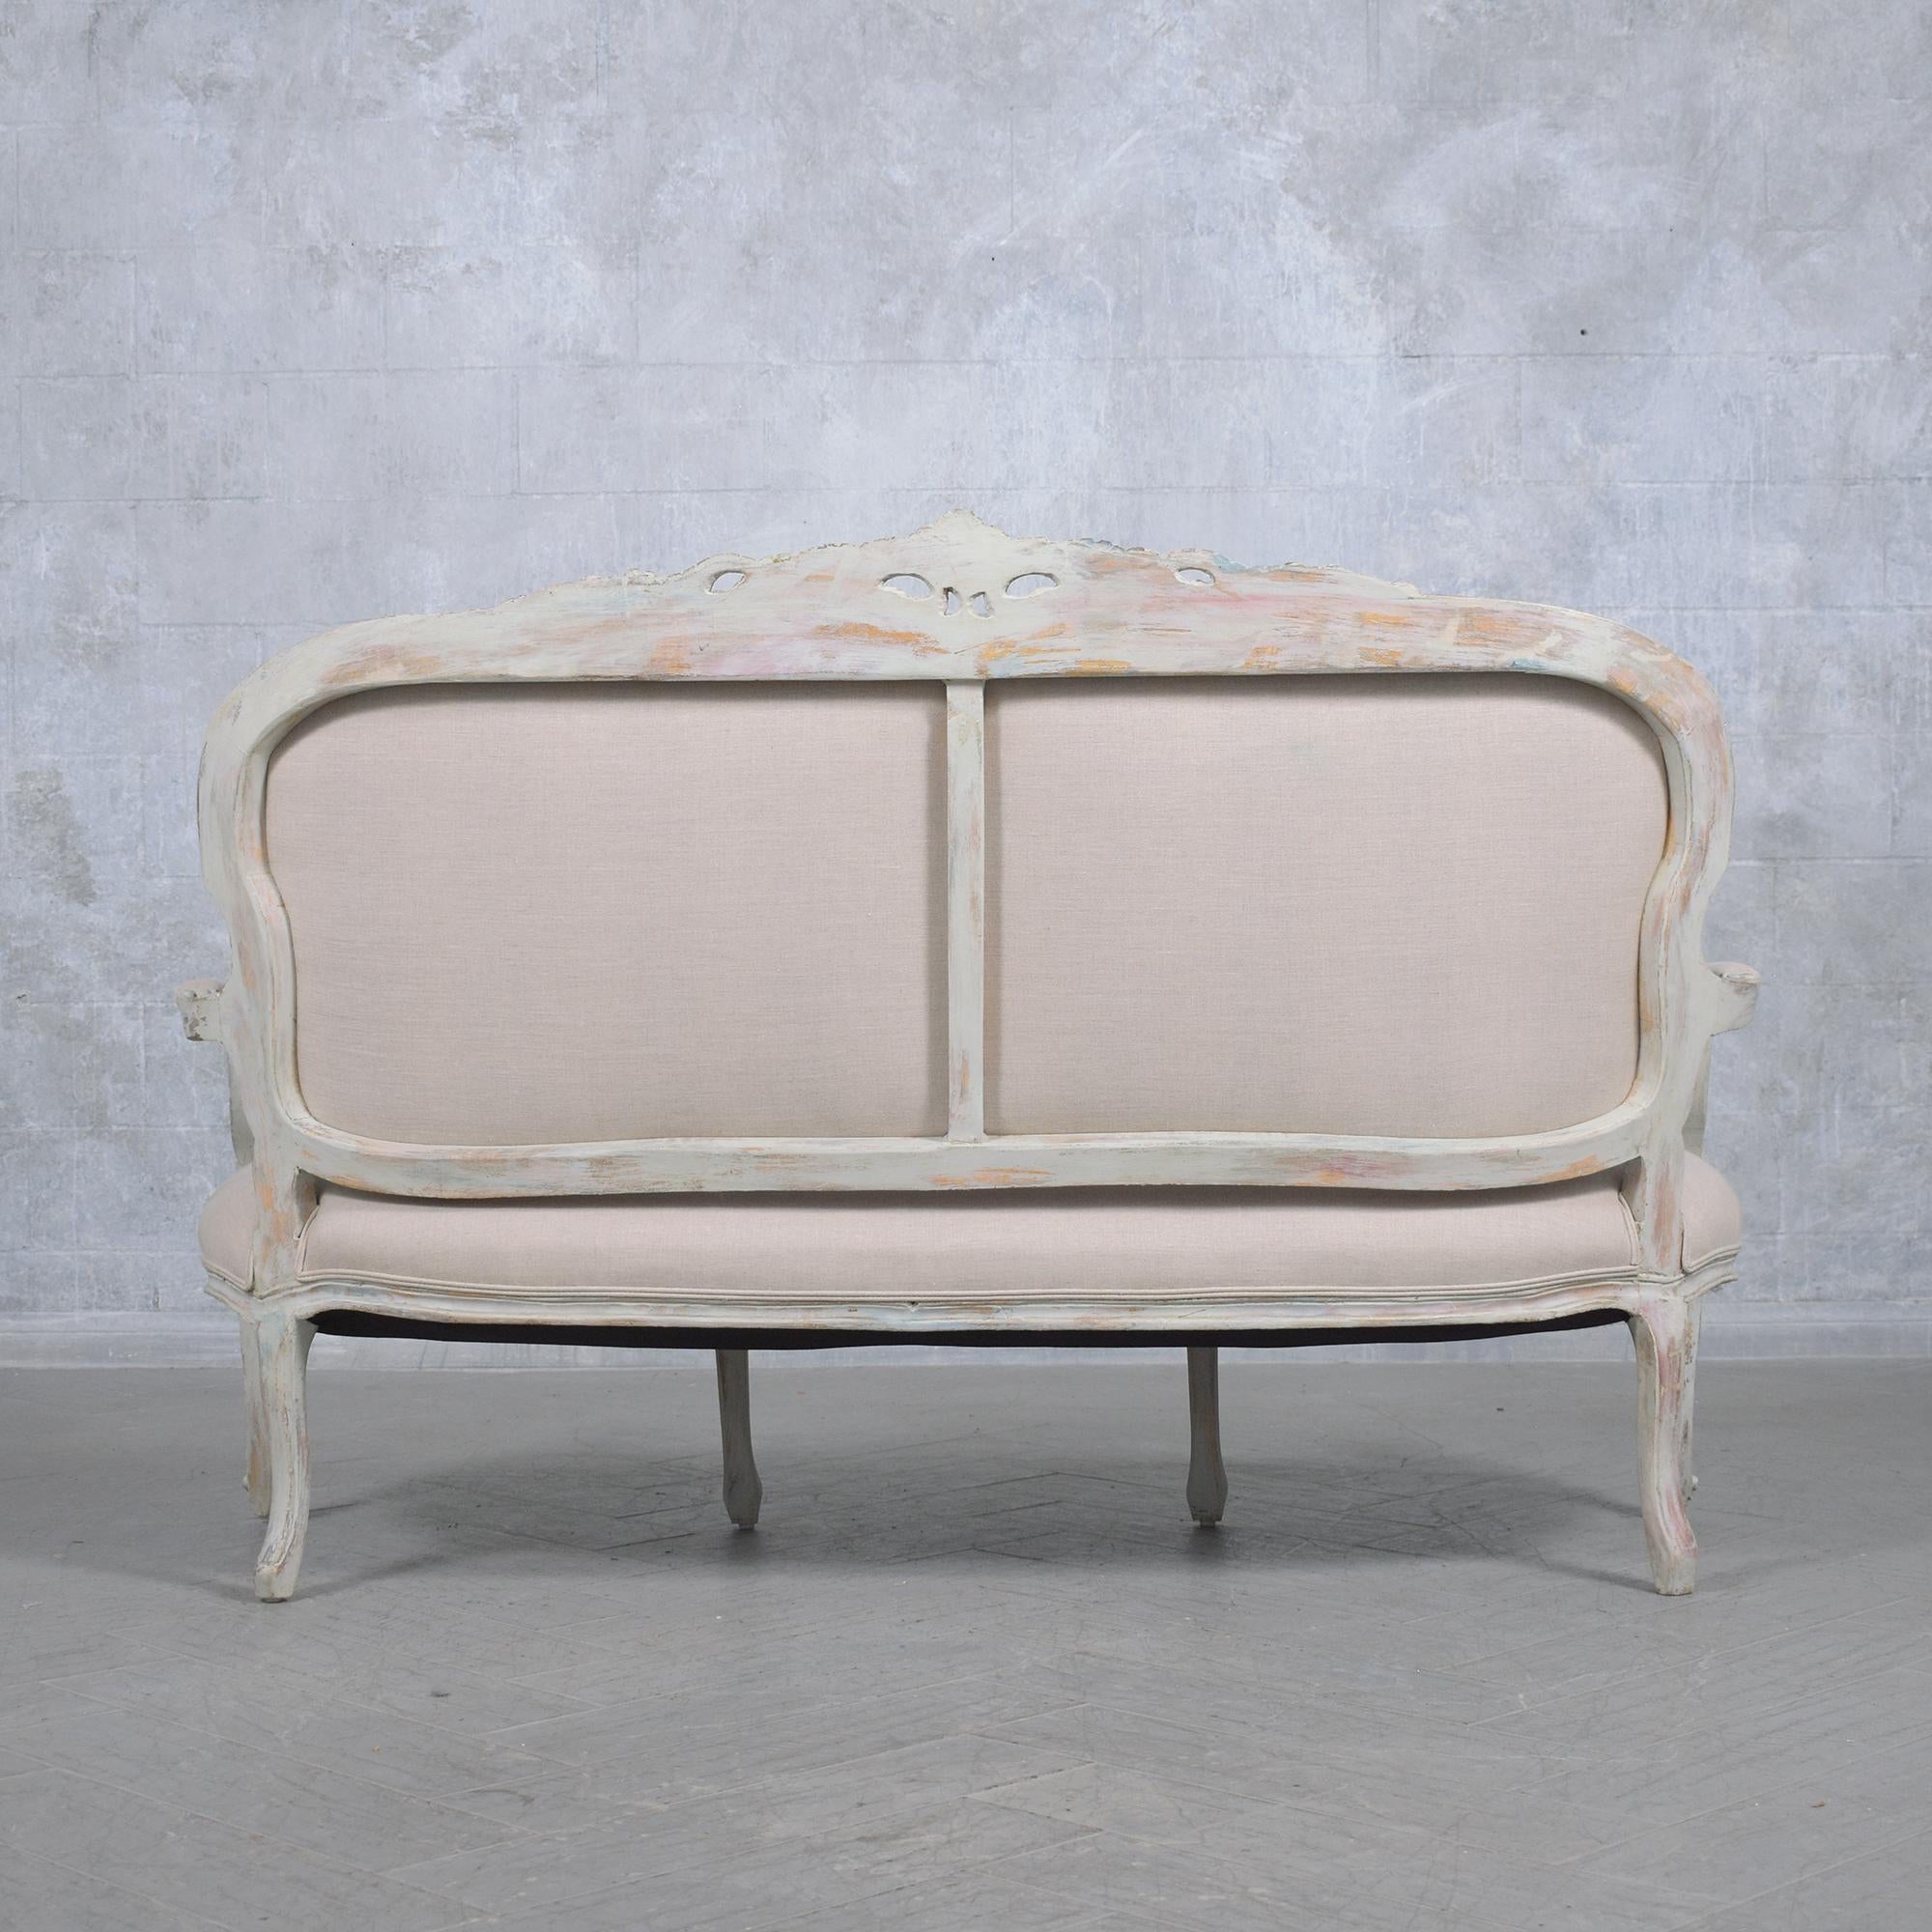 Early 1900s French Sofa: Timeless Elegance in Hand-Carved Wood For Sale 10